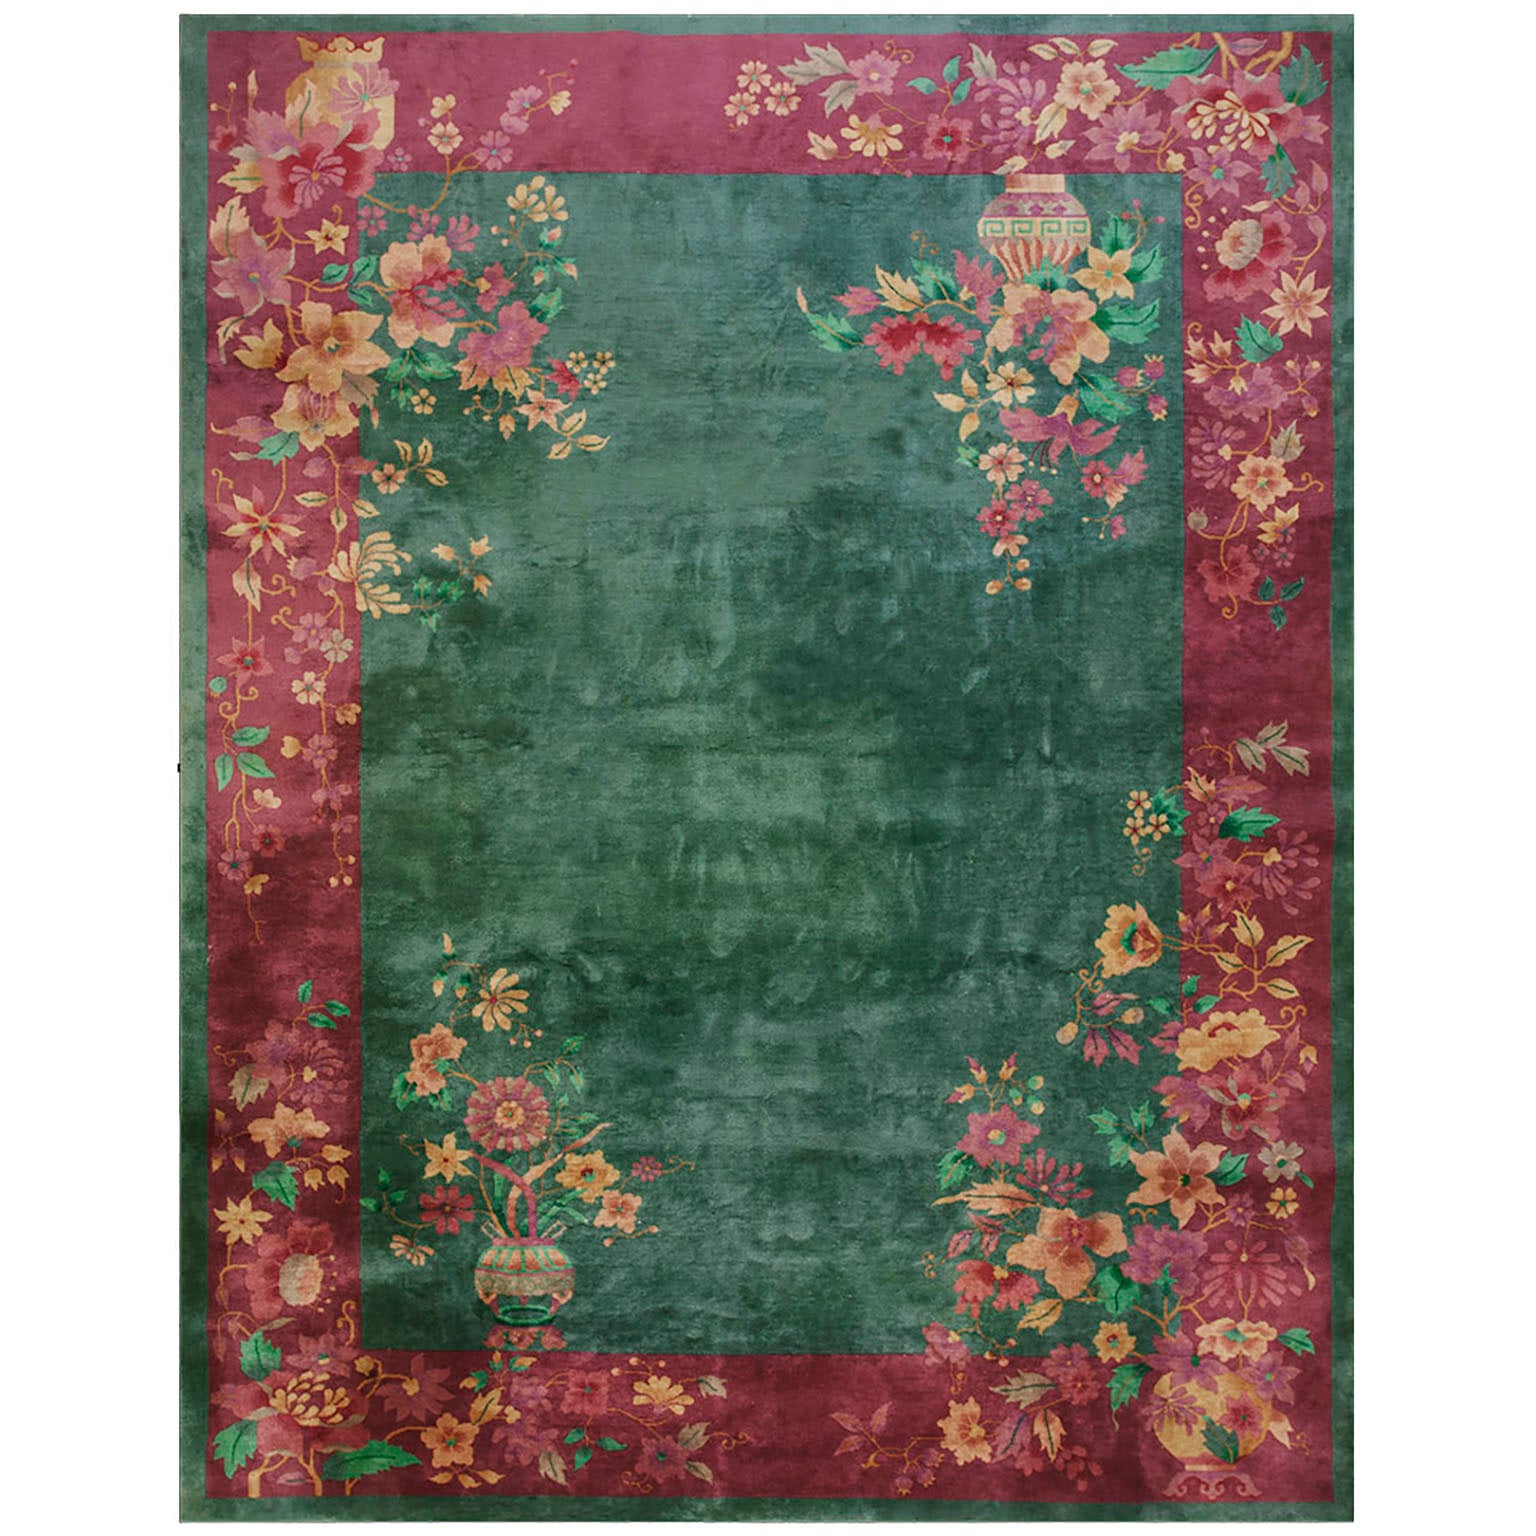 1920s Chinese Art Deco Carpet ( 8'9" x 11'3" - 266 x 343 ) For Sale